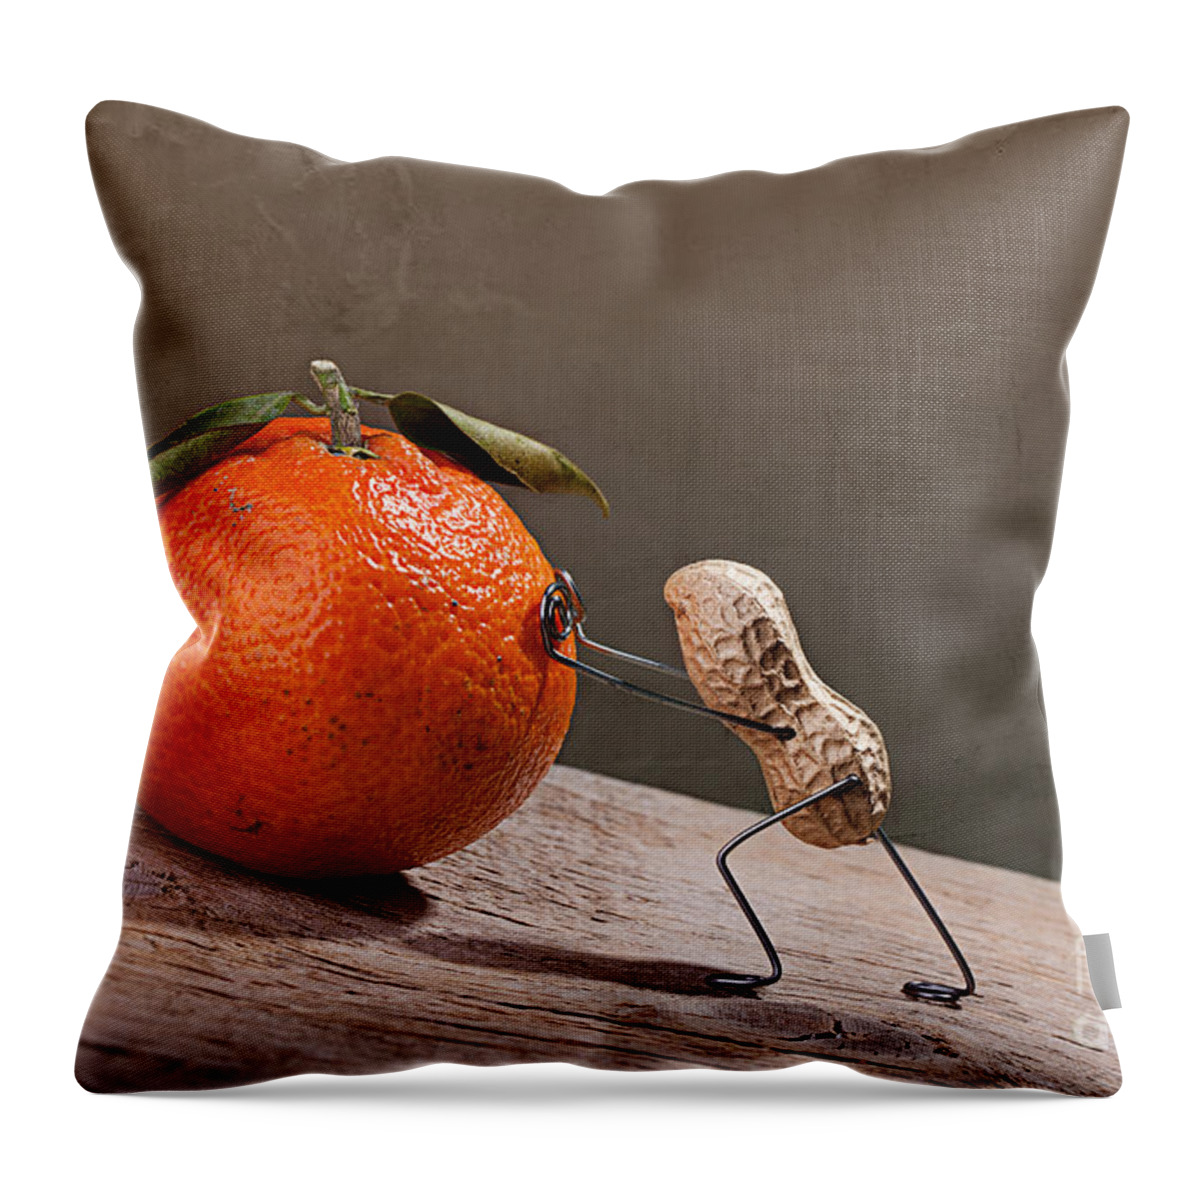 Peanut Throw Pillow featuring the photograph Simple Things - Sisyphos 01 by Nailia Schwarz